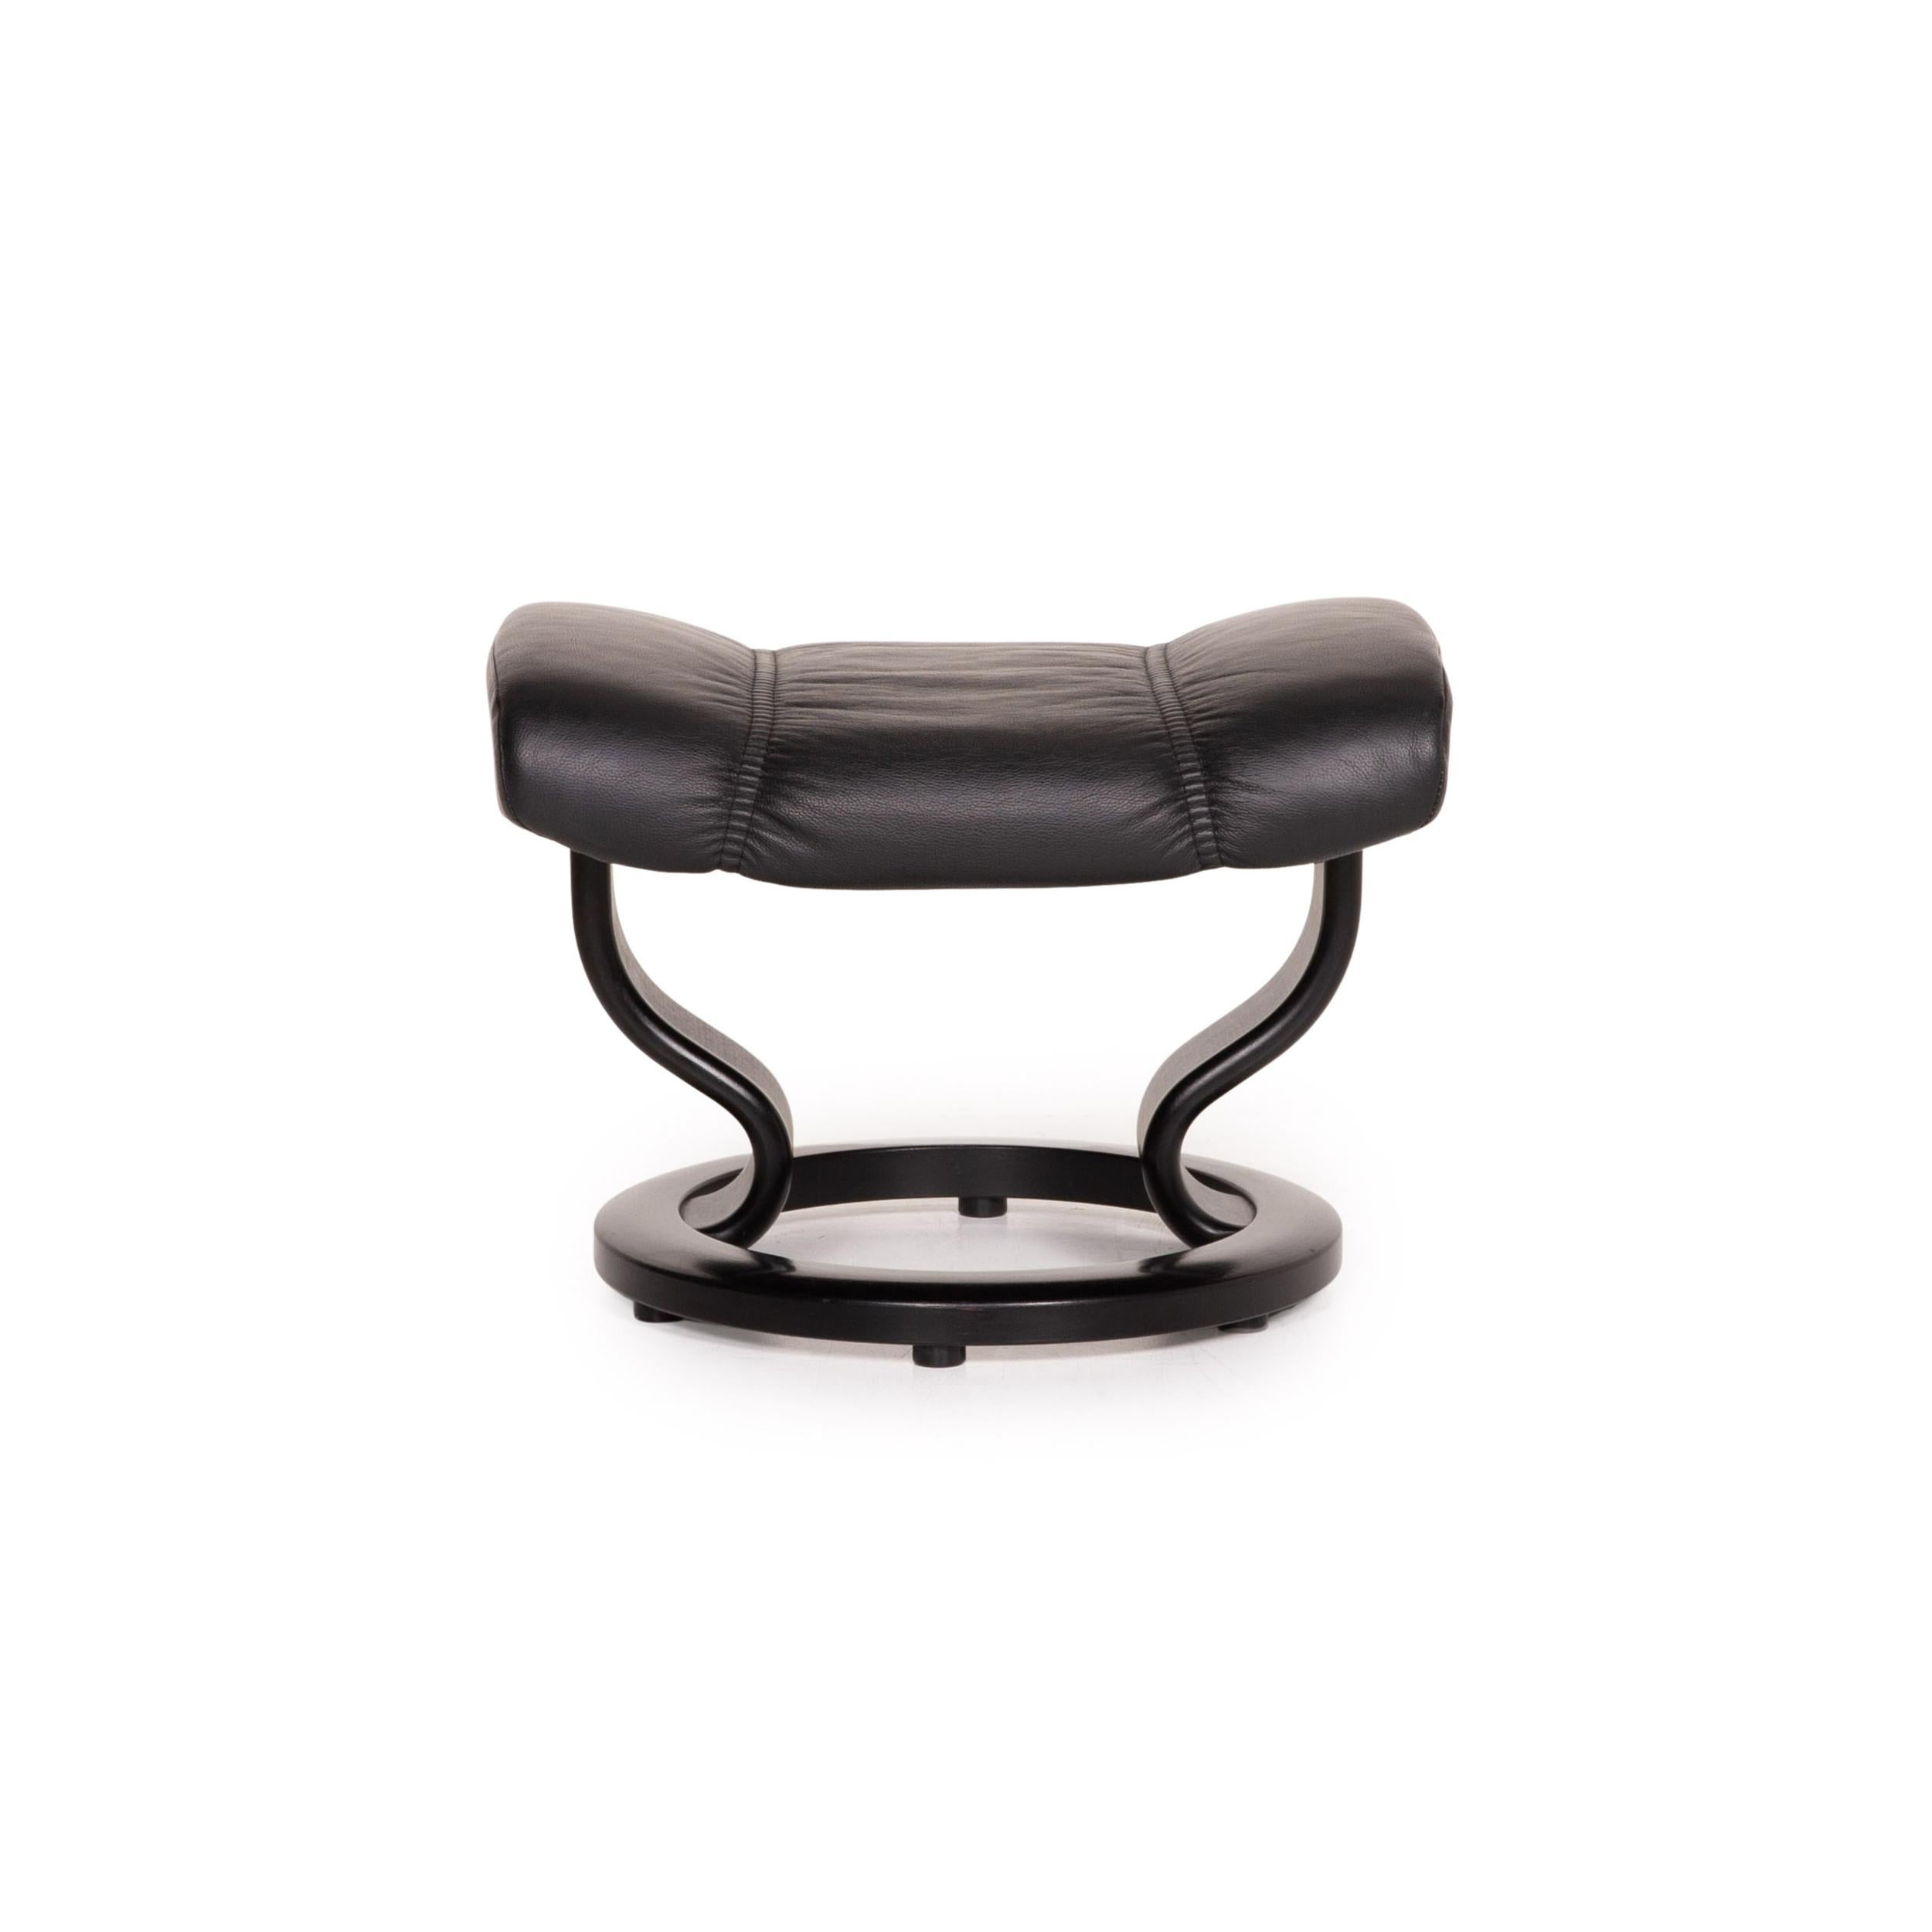 Stressless Consul Leather Armchair Incl. Stool Black Function Relaxation For Sale 13